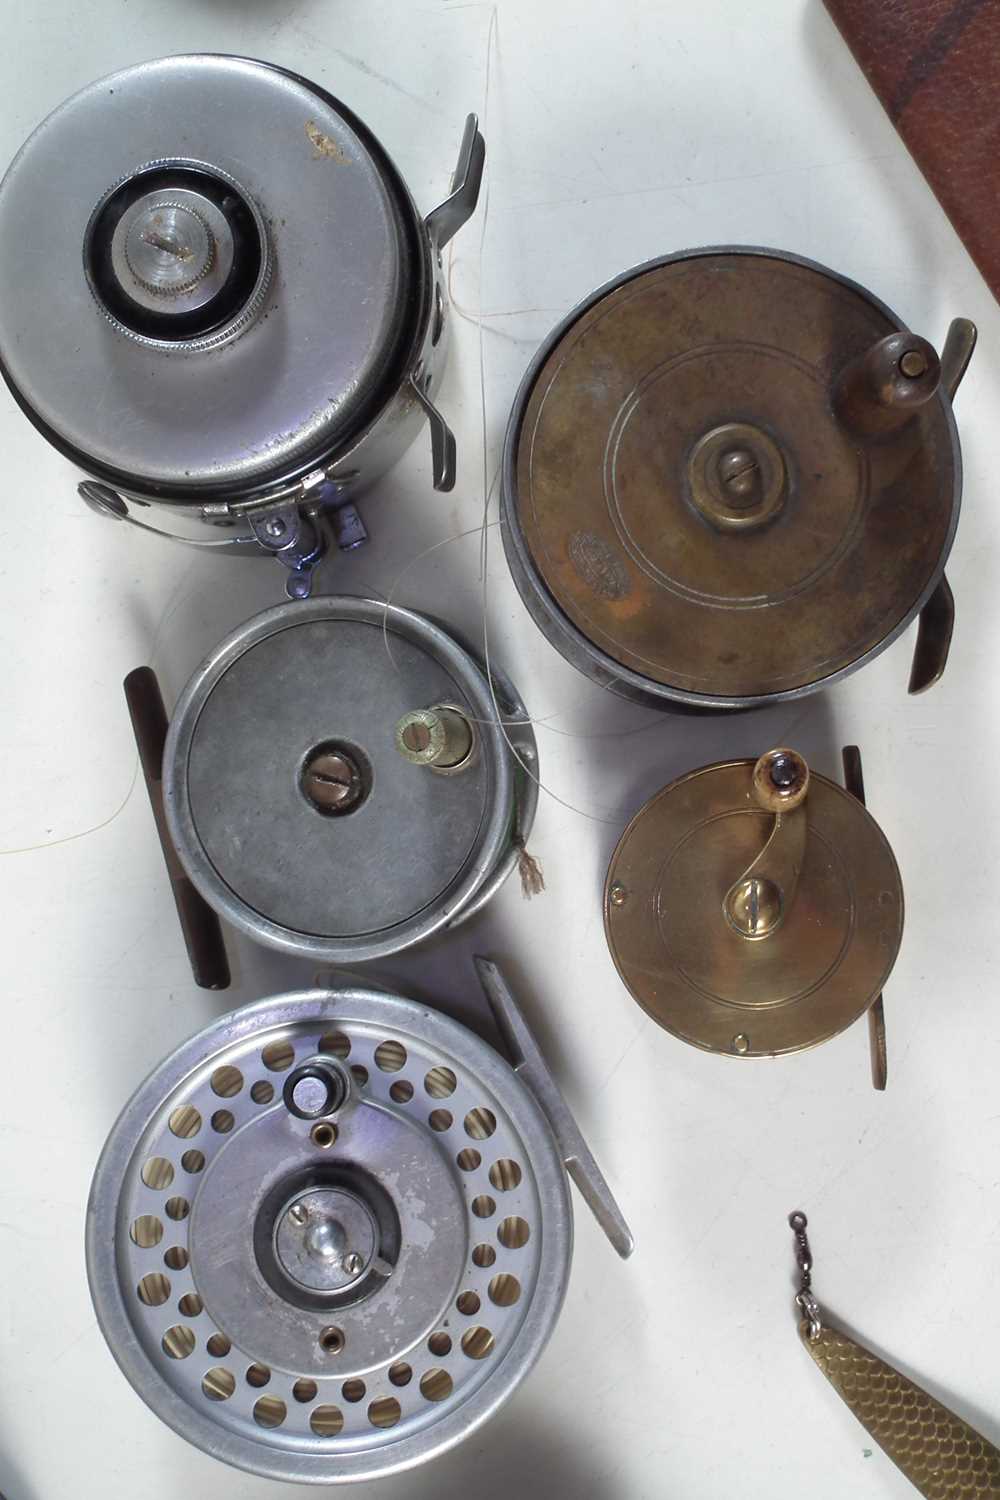 Two Hardy reels and related fishing vintage tackle - Image 2 of 21